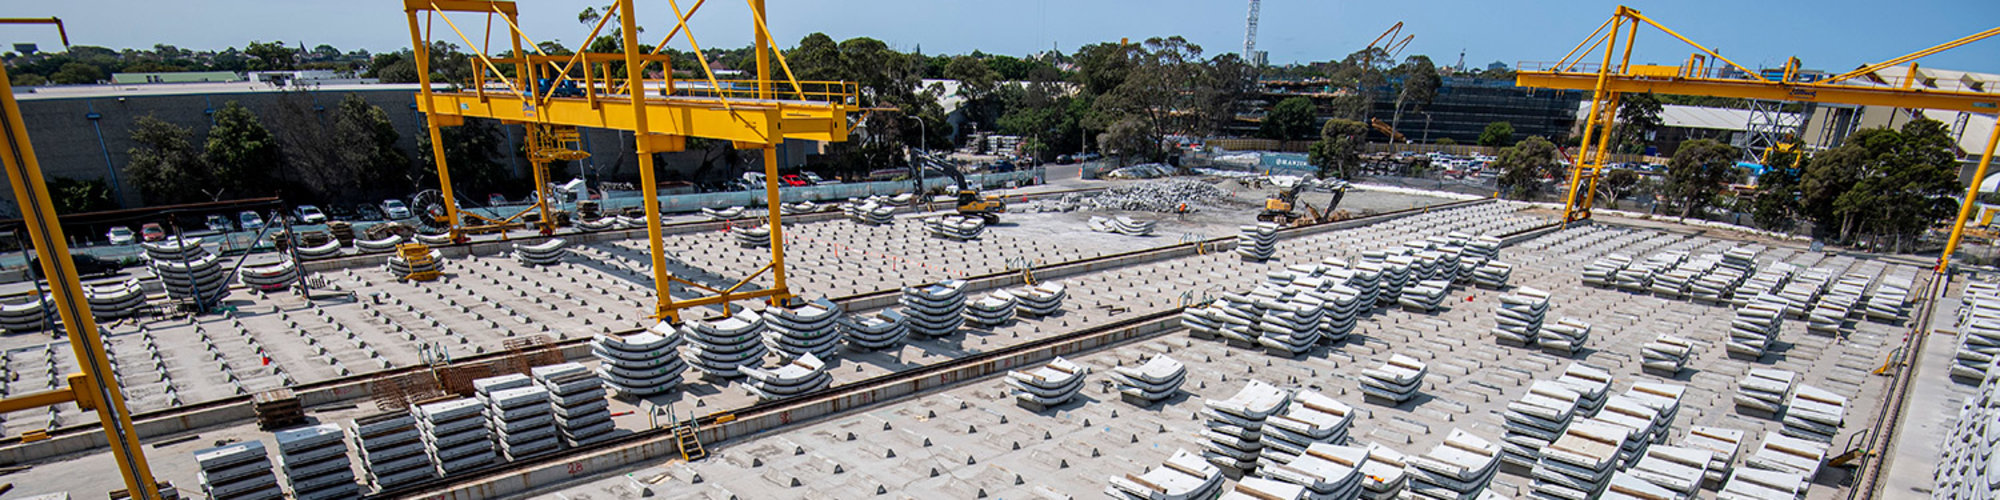 The Marrickville precast facility yard that stored the tunnel segments is now emptying out.